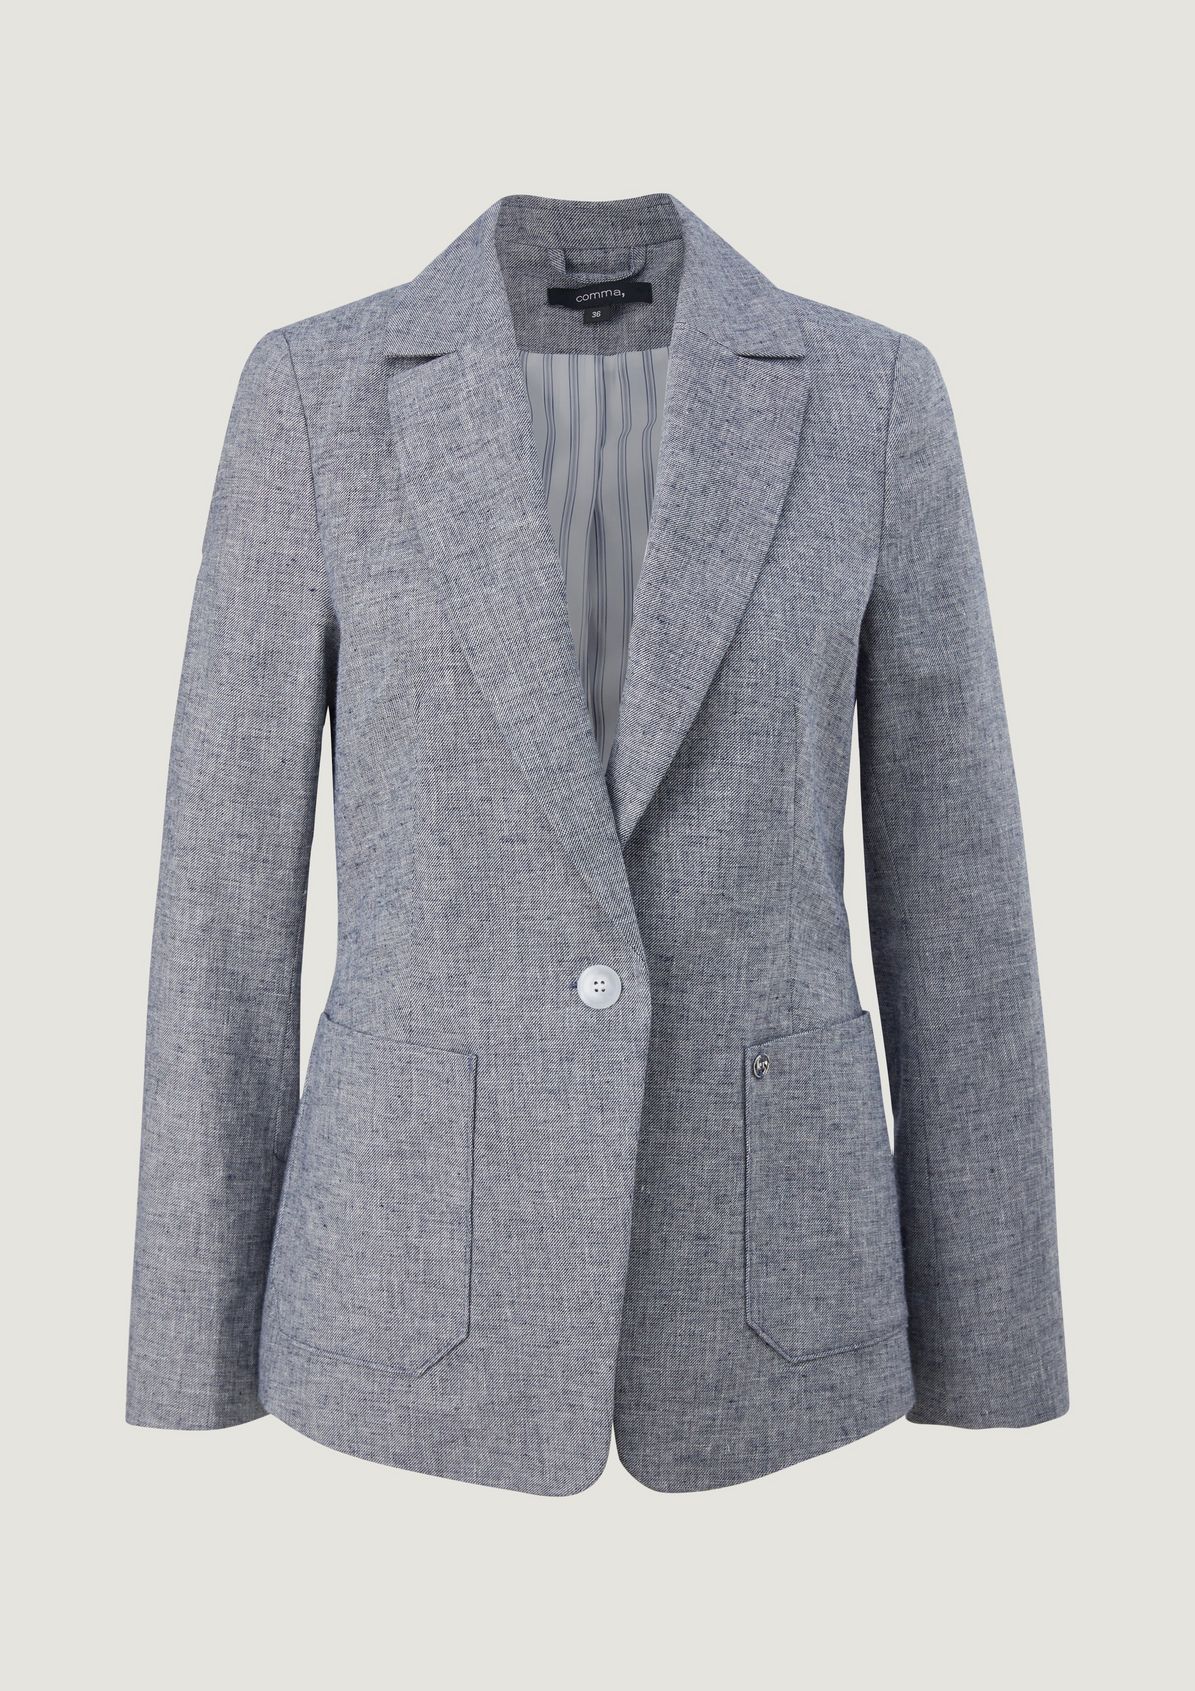 Blazer in a linen blend from comma